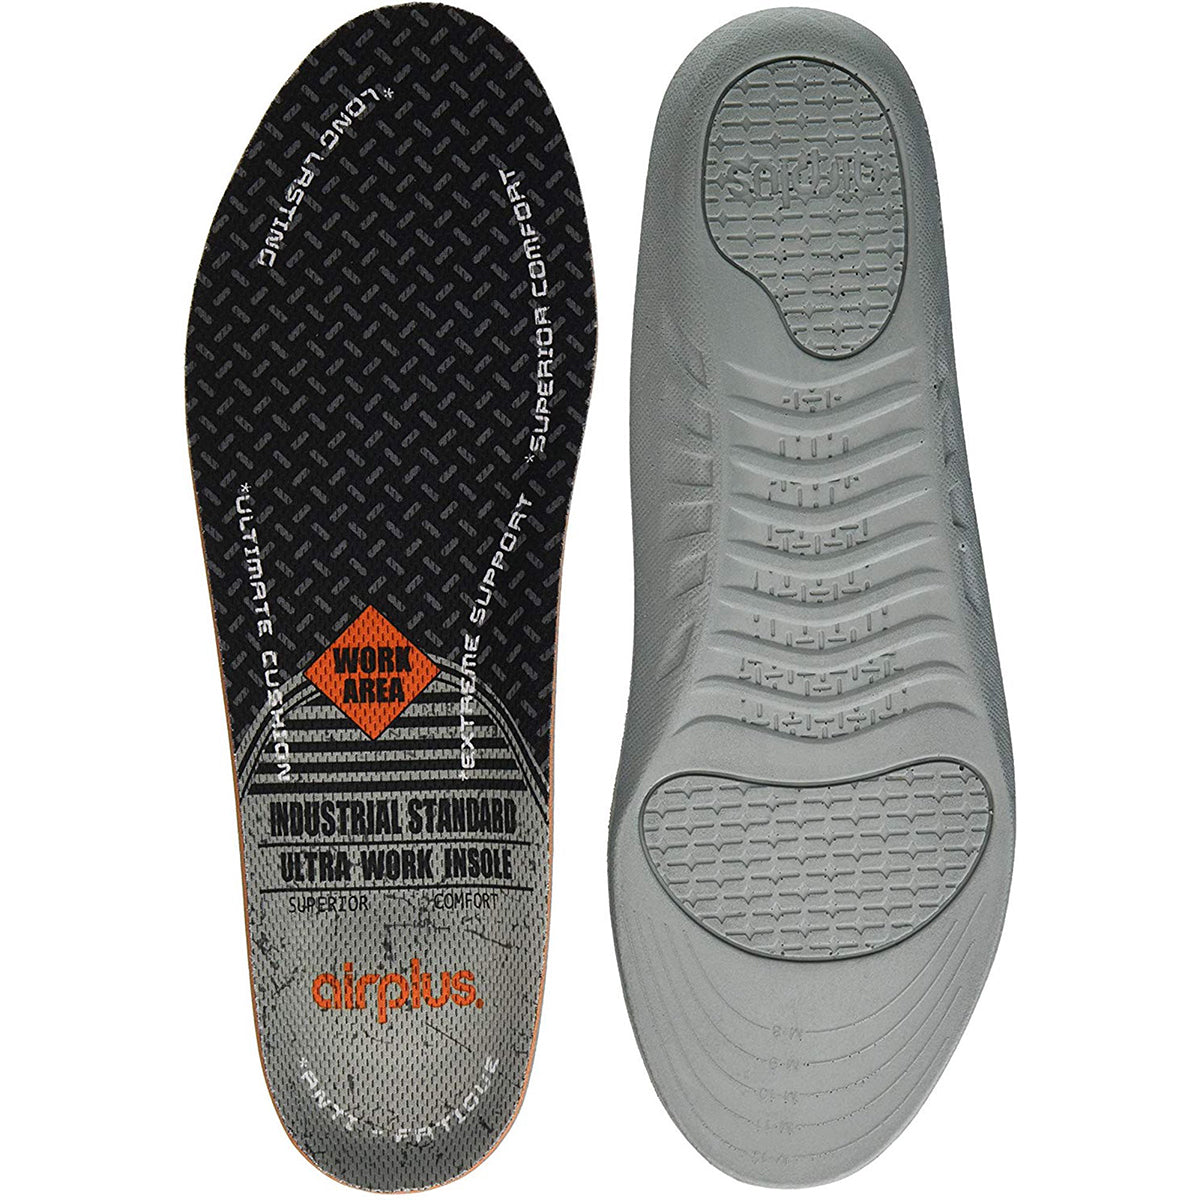 Airplus Men's Size 7-13 Ultra Work Anti-Fatigue Memory Comfort Shoe Insoles Airplus